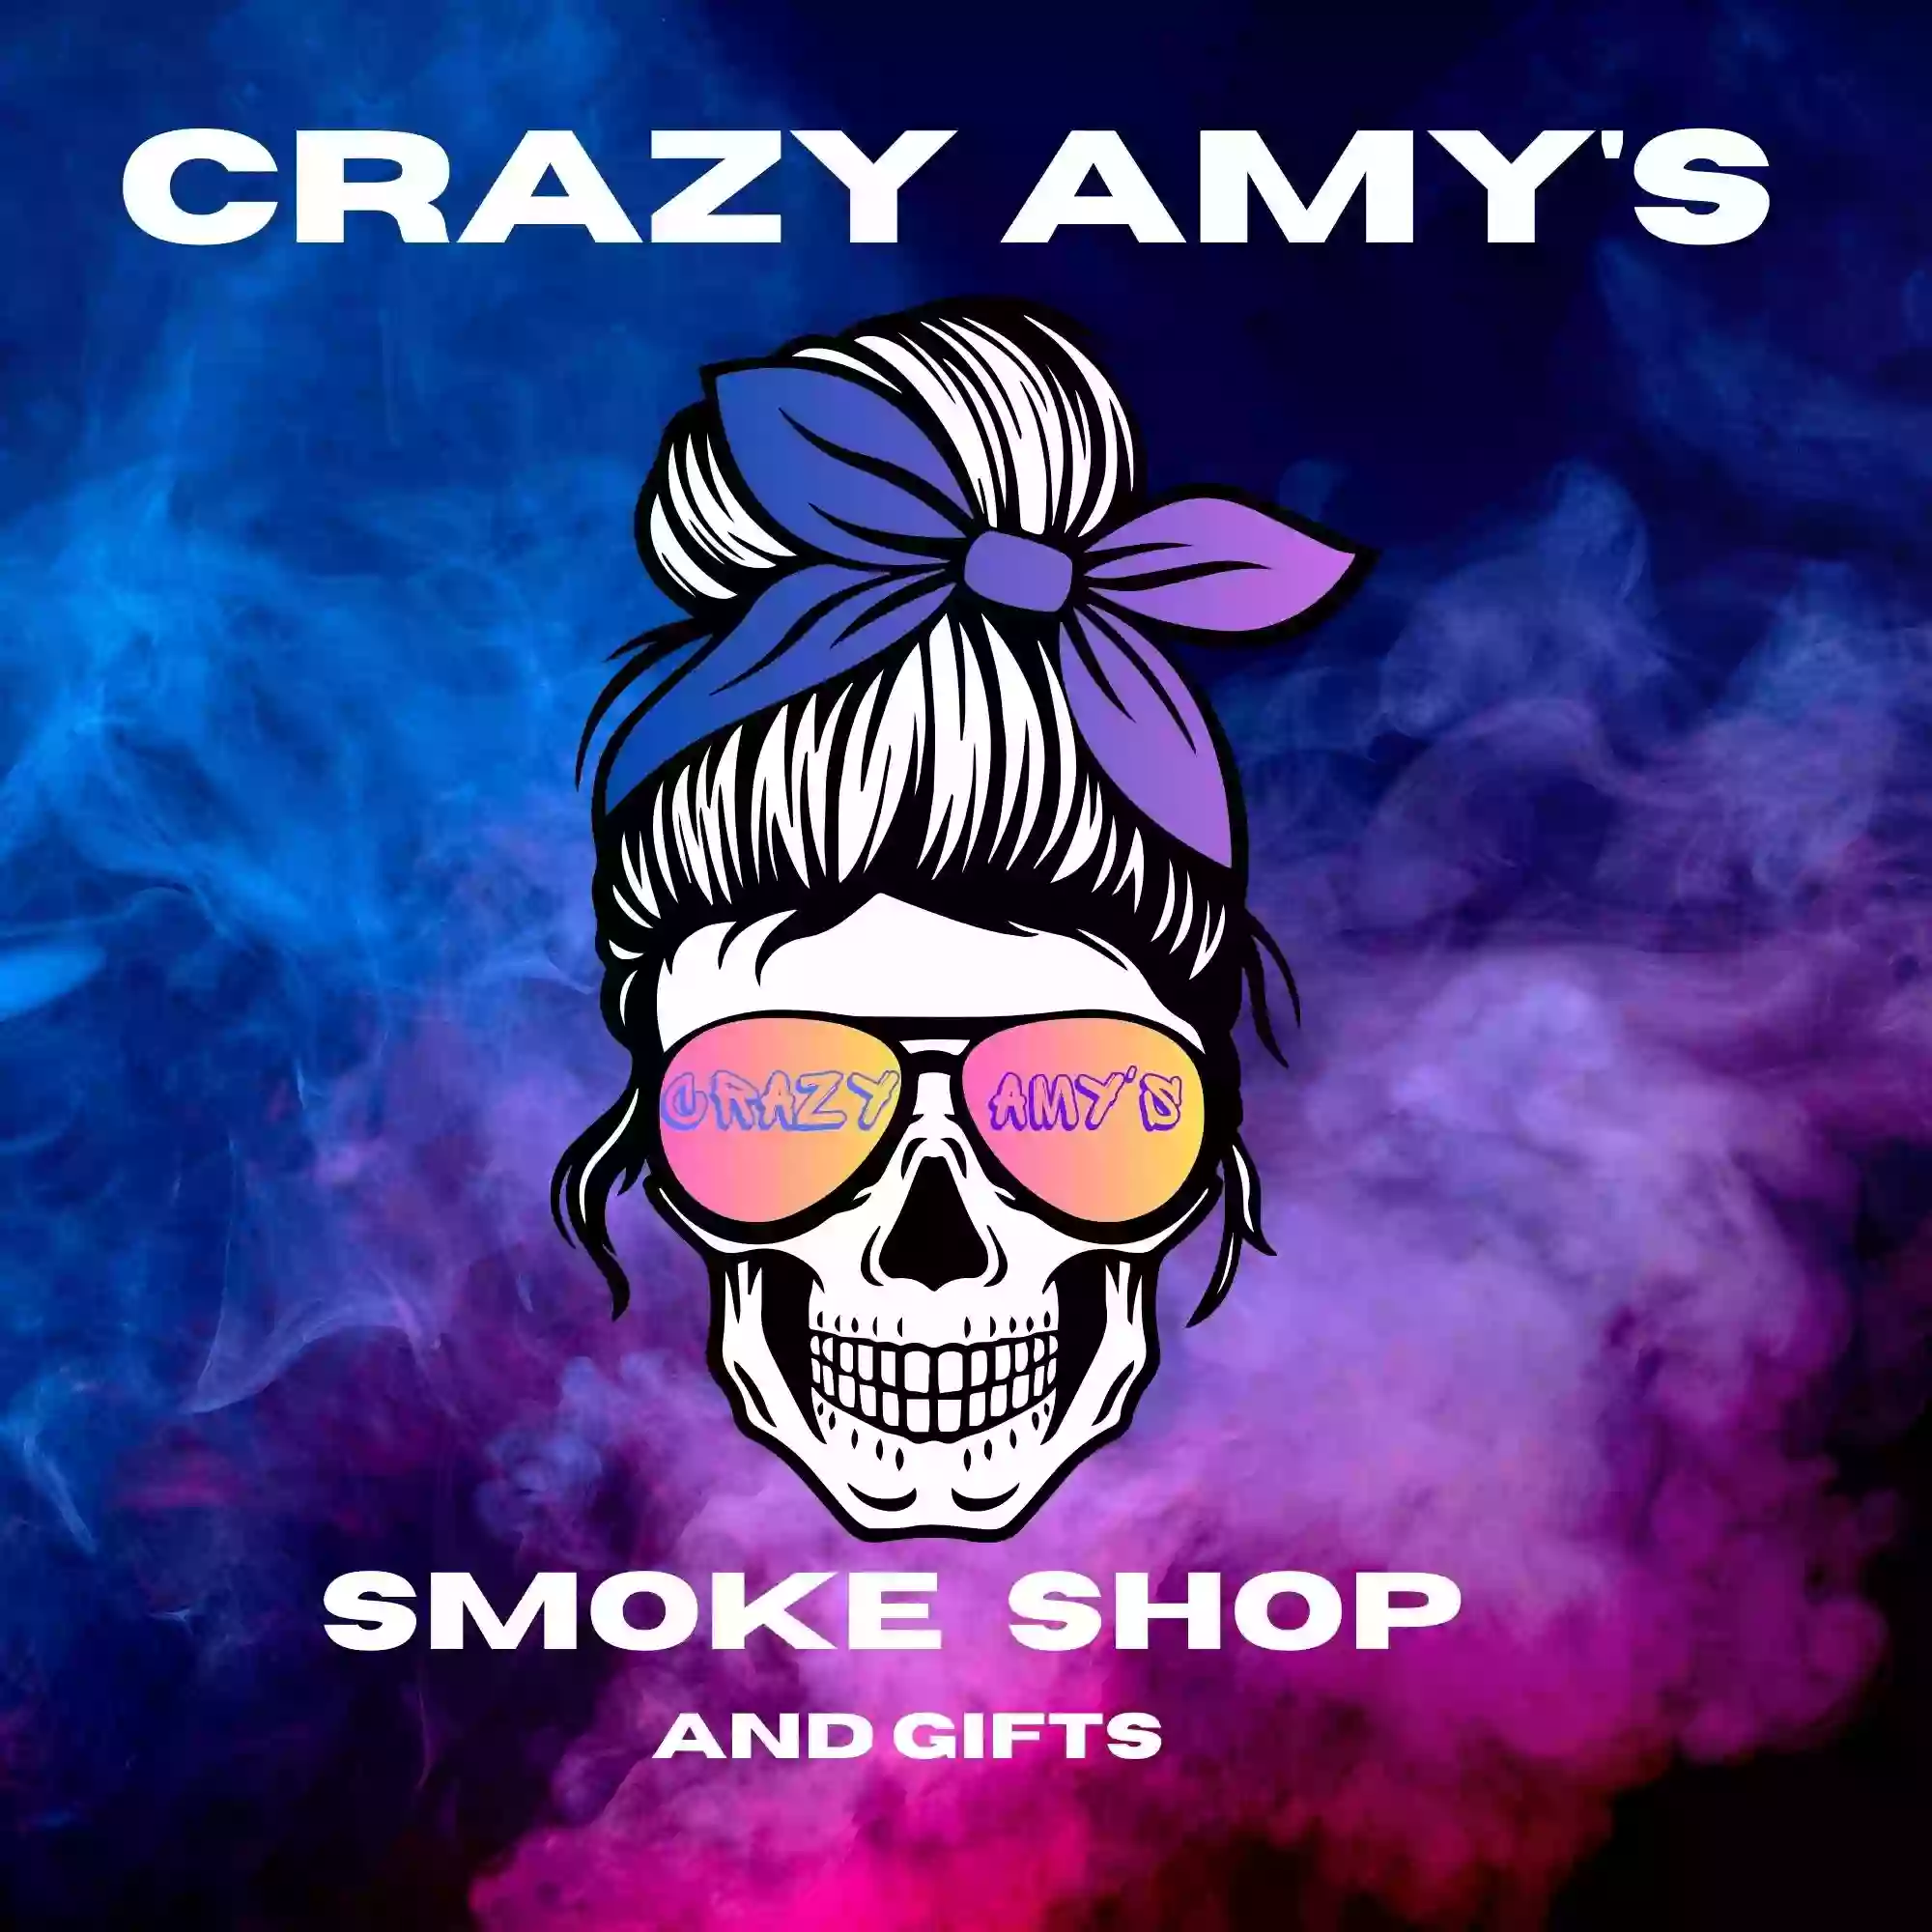 Crazy Amy's Smoke and Gift Shop